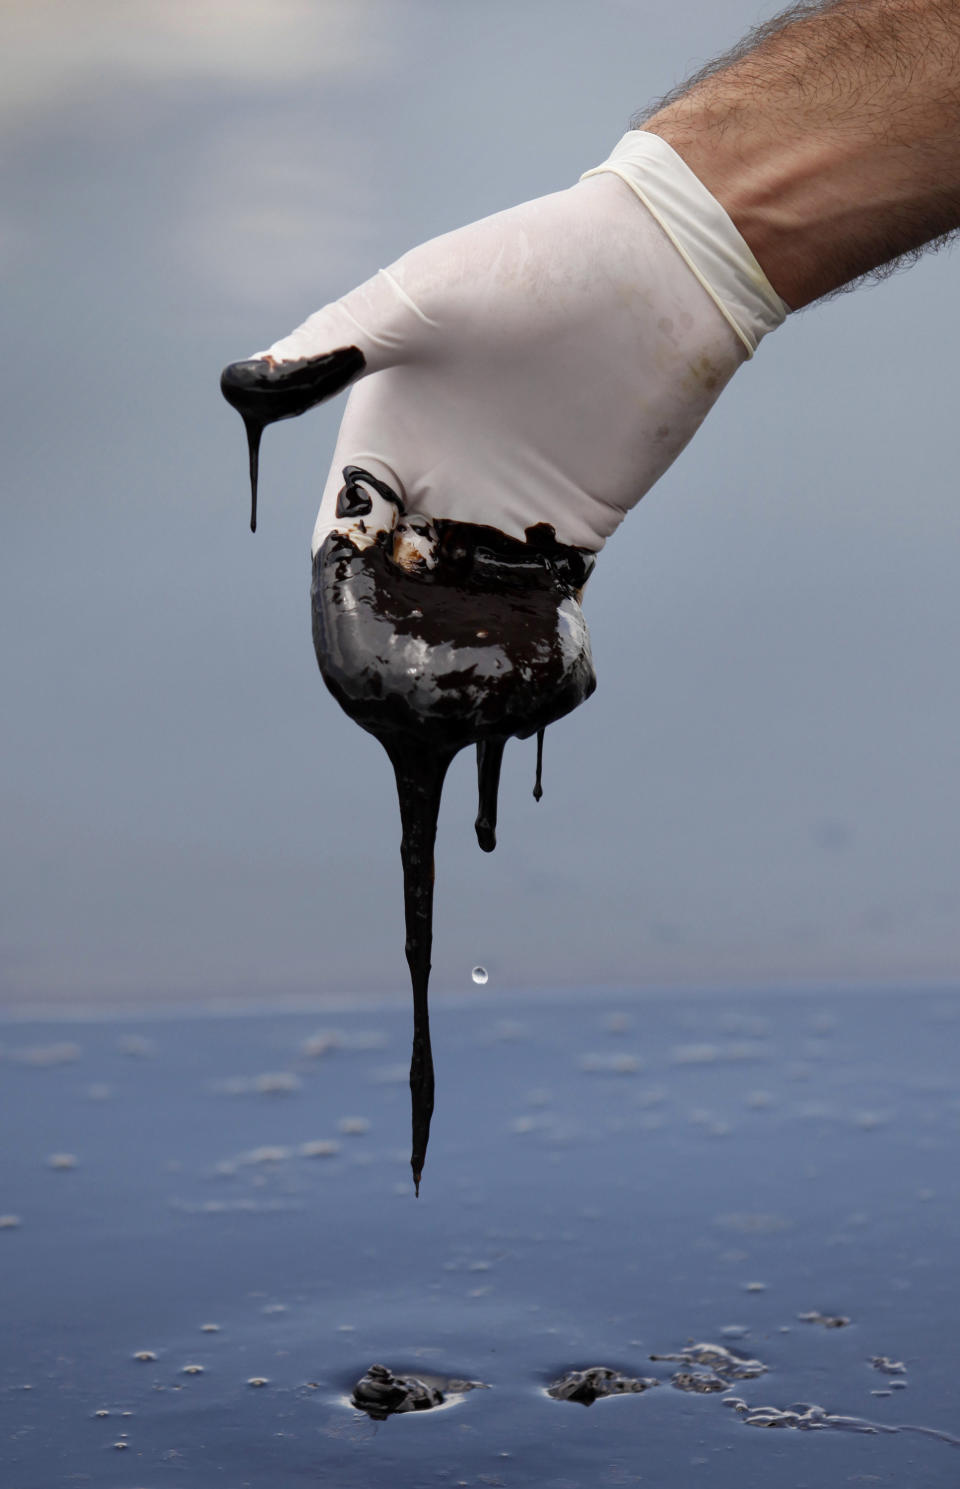 FILE - In this June 15, 2010 file photo, a member of Louisiana Gov. Bobby Jindal's staff wearing a glove reaches into thick oil on the surface of the northern regions of Barataria Bay in Plaquemines Parish, La. Over BP’s objections, a federal appeals court on Friday Jan. 10, 2014, upheld a judge's approval of the company’s multibillion-dollar settlement with lawyers for businesses and residents who claim the massive 2010 oil spill in the Gulf of Mexico cost them money. (AP Photo/Gerald Herbert, File)